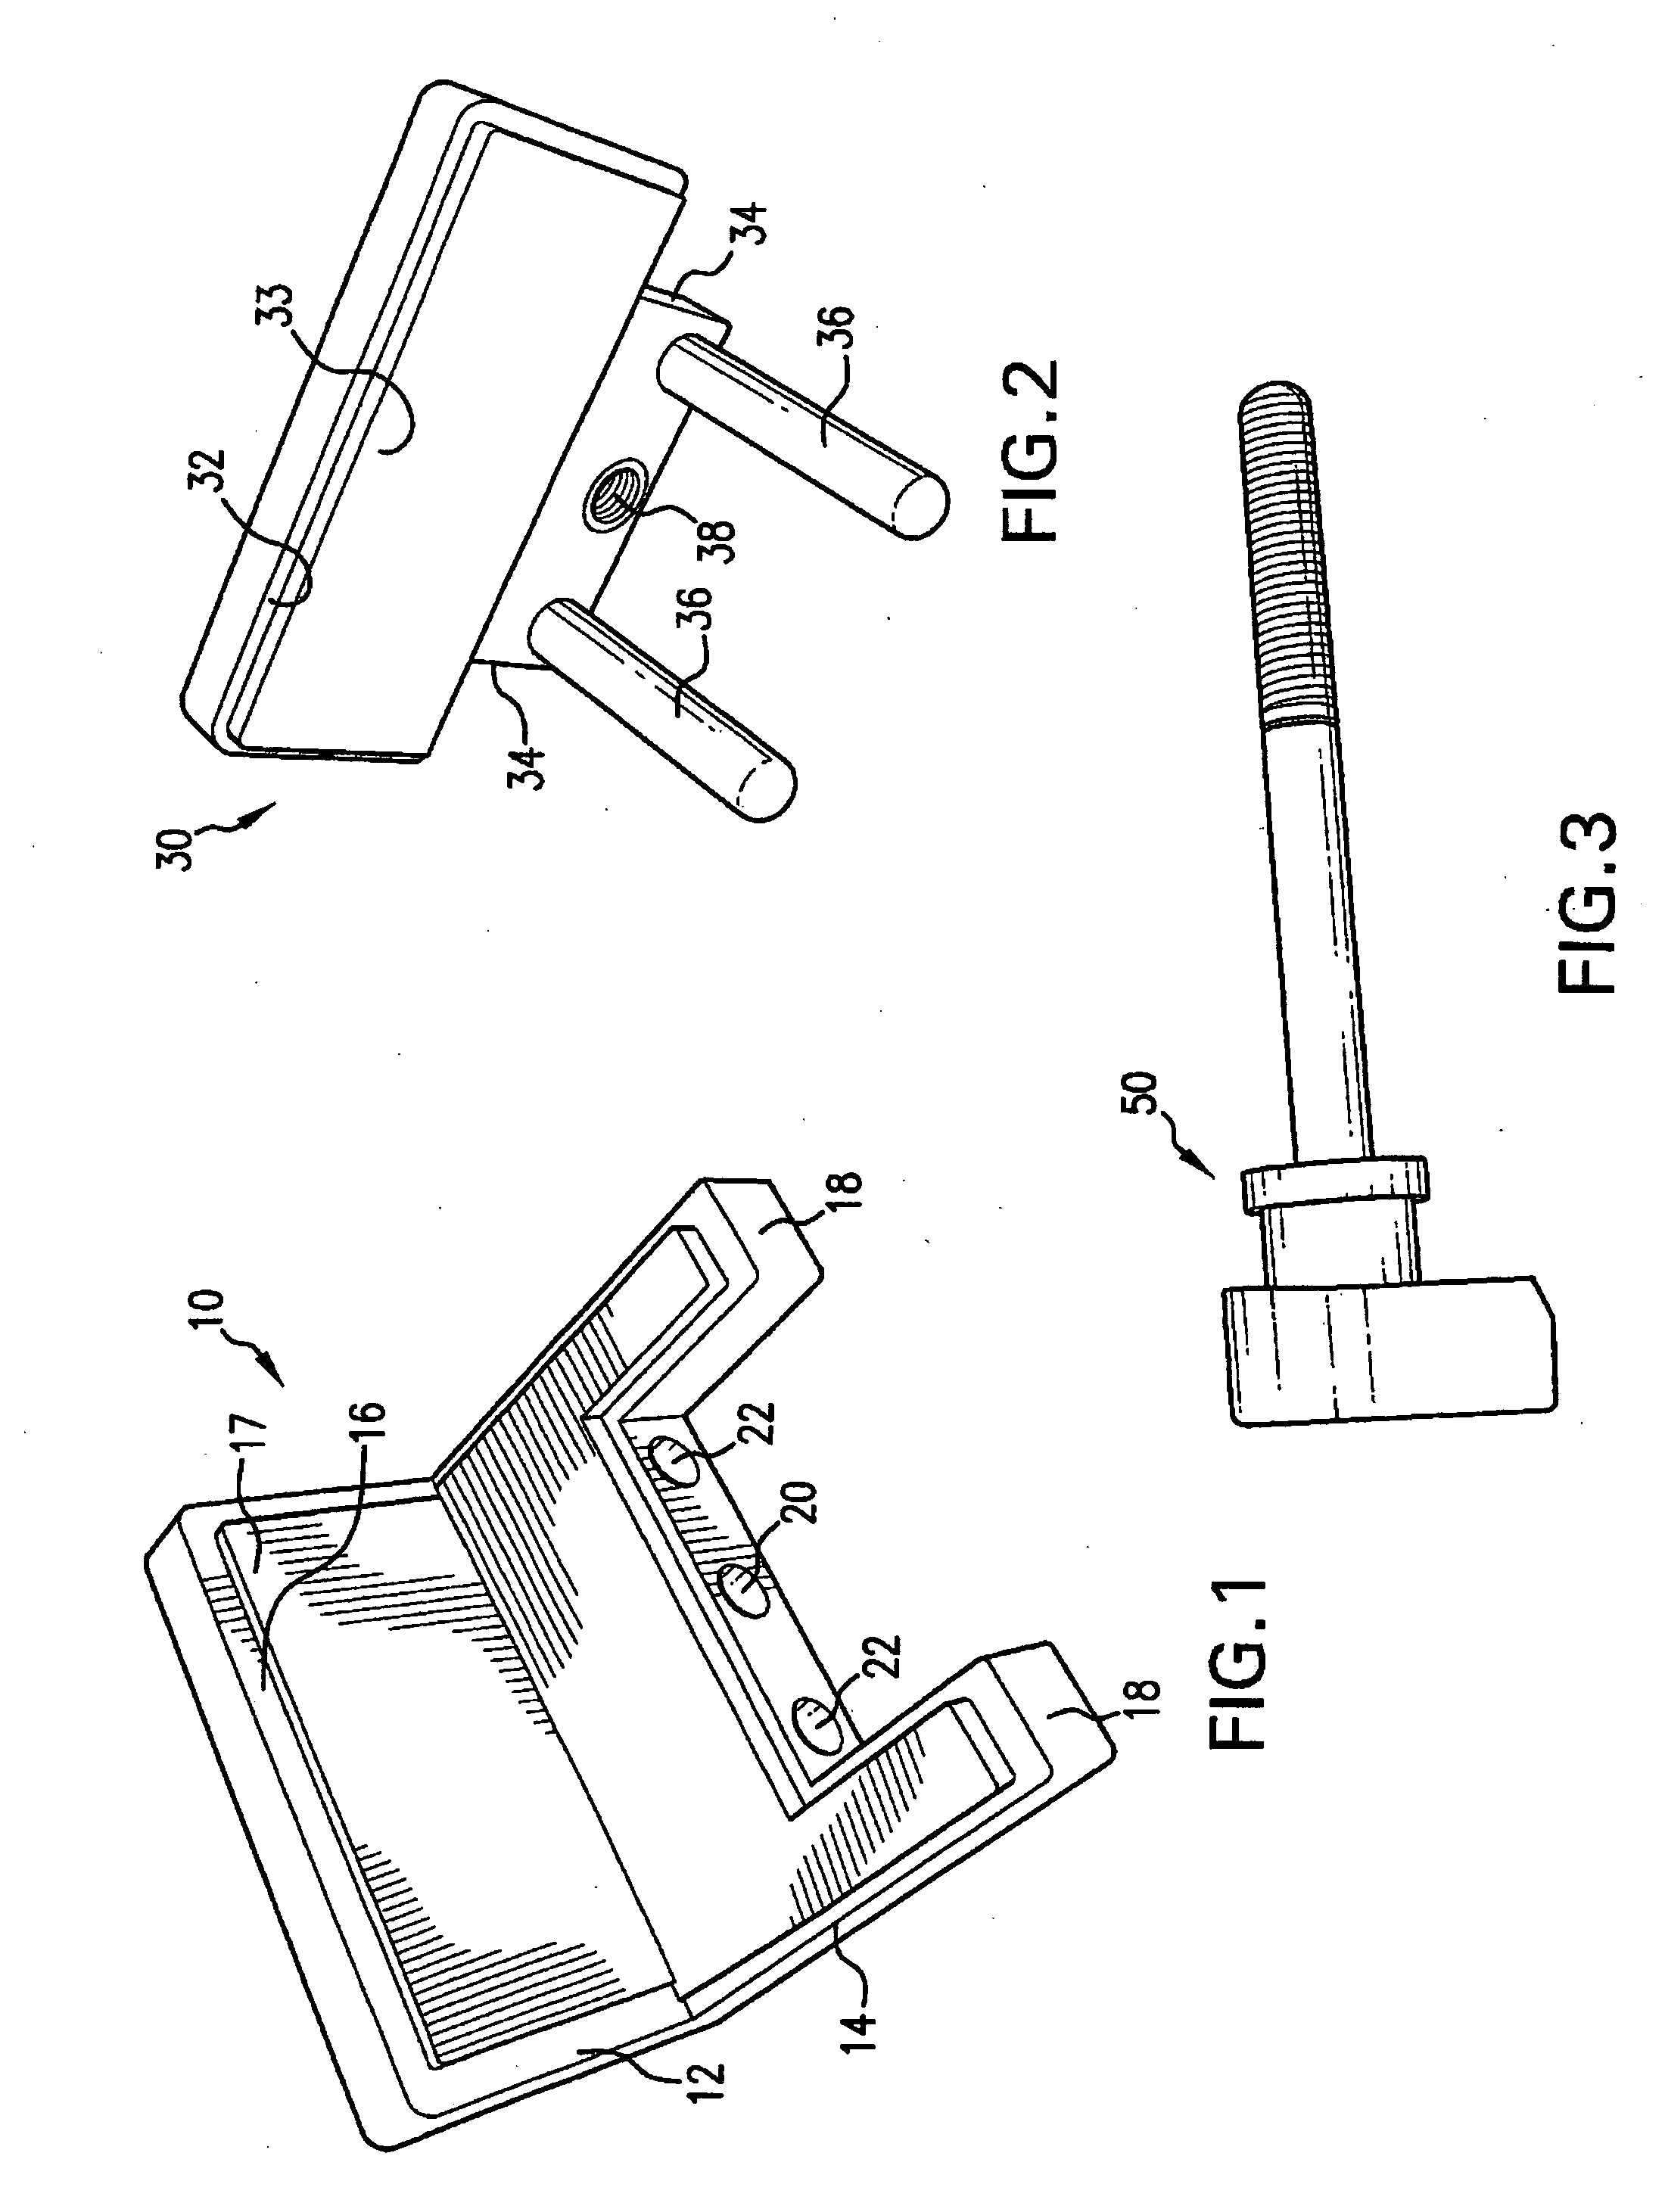 Removable device configured to secure an instrument and to be mounted on a platform